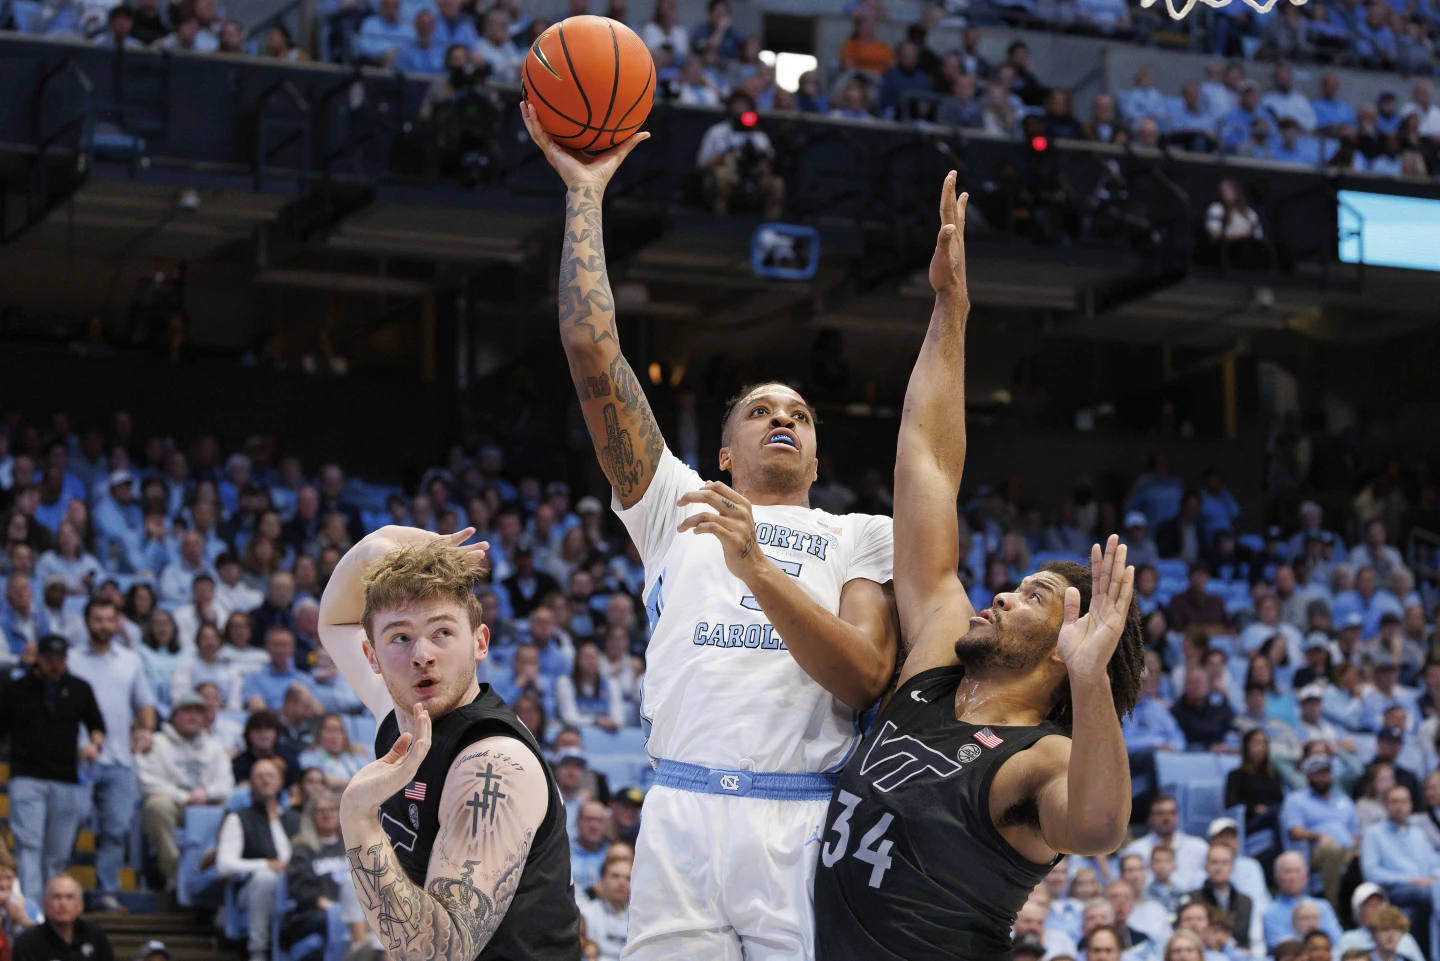 UNC gets big bounce-back win with beast mode from Ingram early, Bacot late